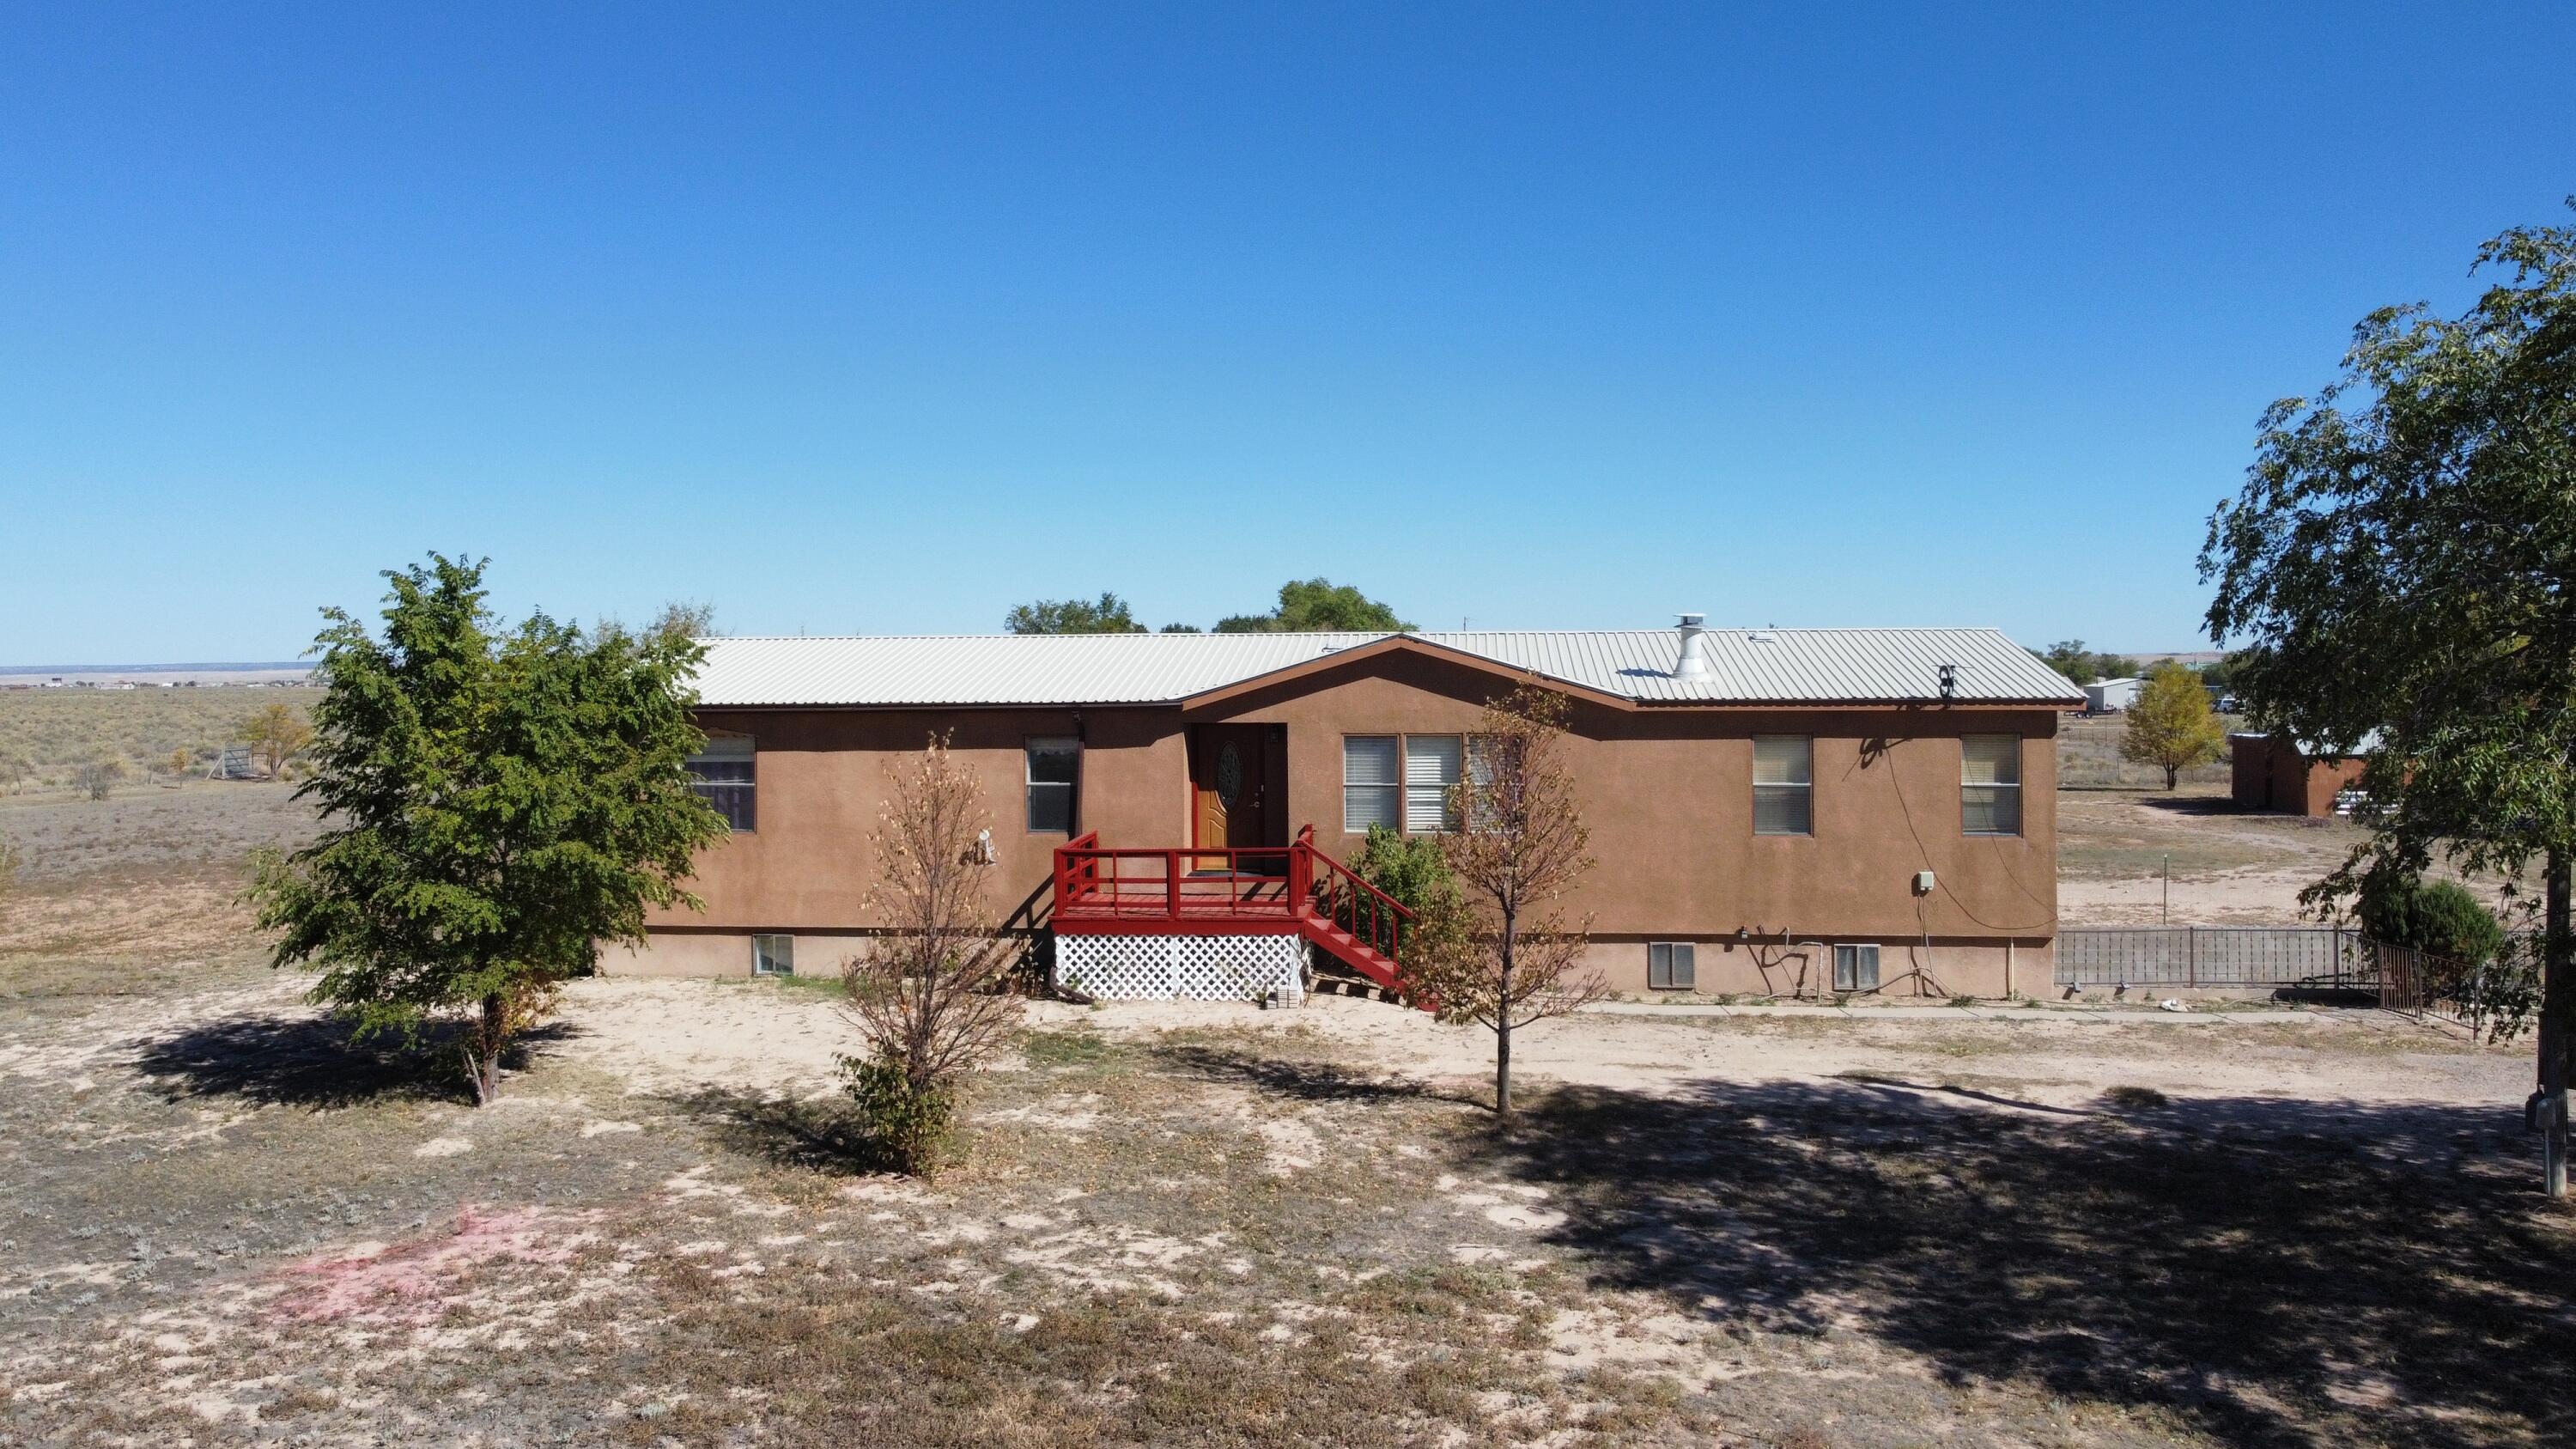 35 Dalton Place, Moriarty, New Mexico 87035, 3 Bedrooms Bedrooms, ,4 BathroomsBathrooms,Residential,For Sale,35 Dalton Place,1043423